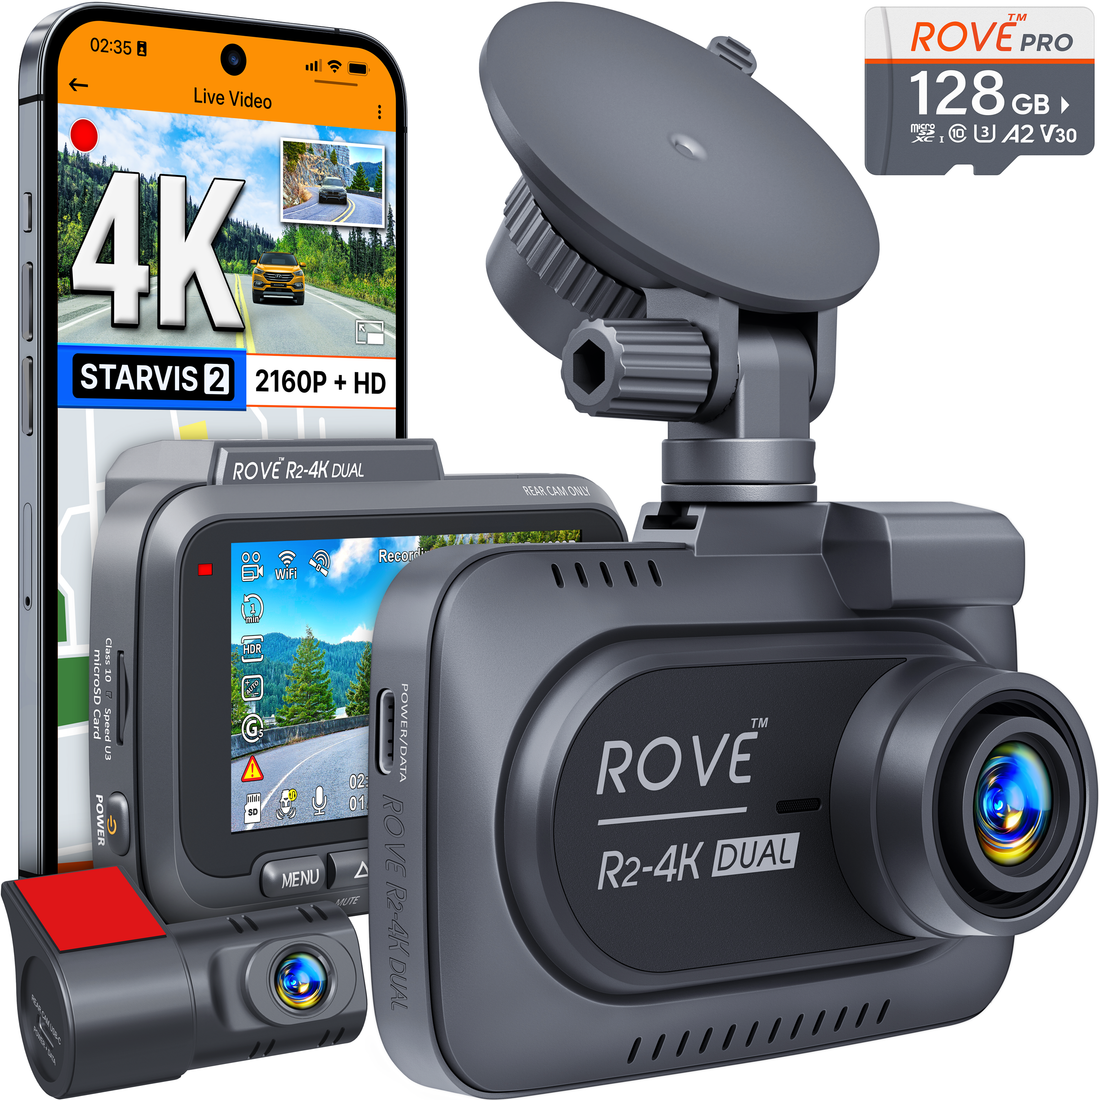 NEW ROVE R2-4K DUAL Dash Cam Front and Rear, STARVIS 2 Sensor, FREE 128GB Card Included, 5G WiFi